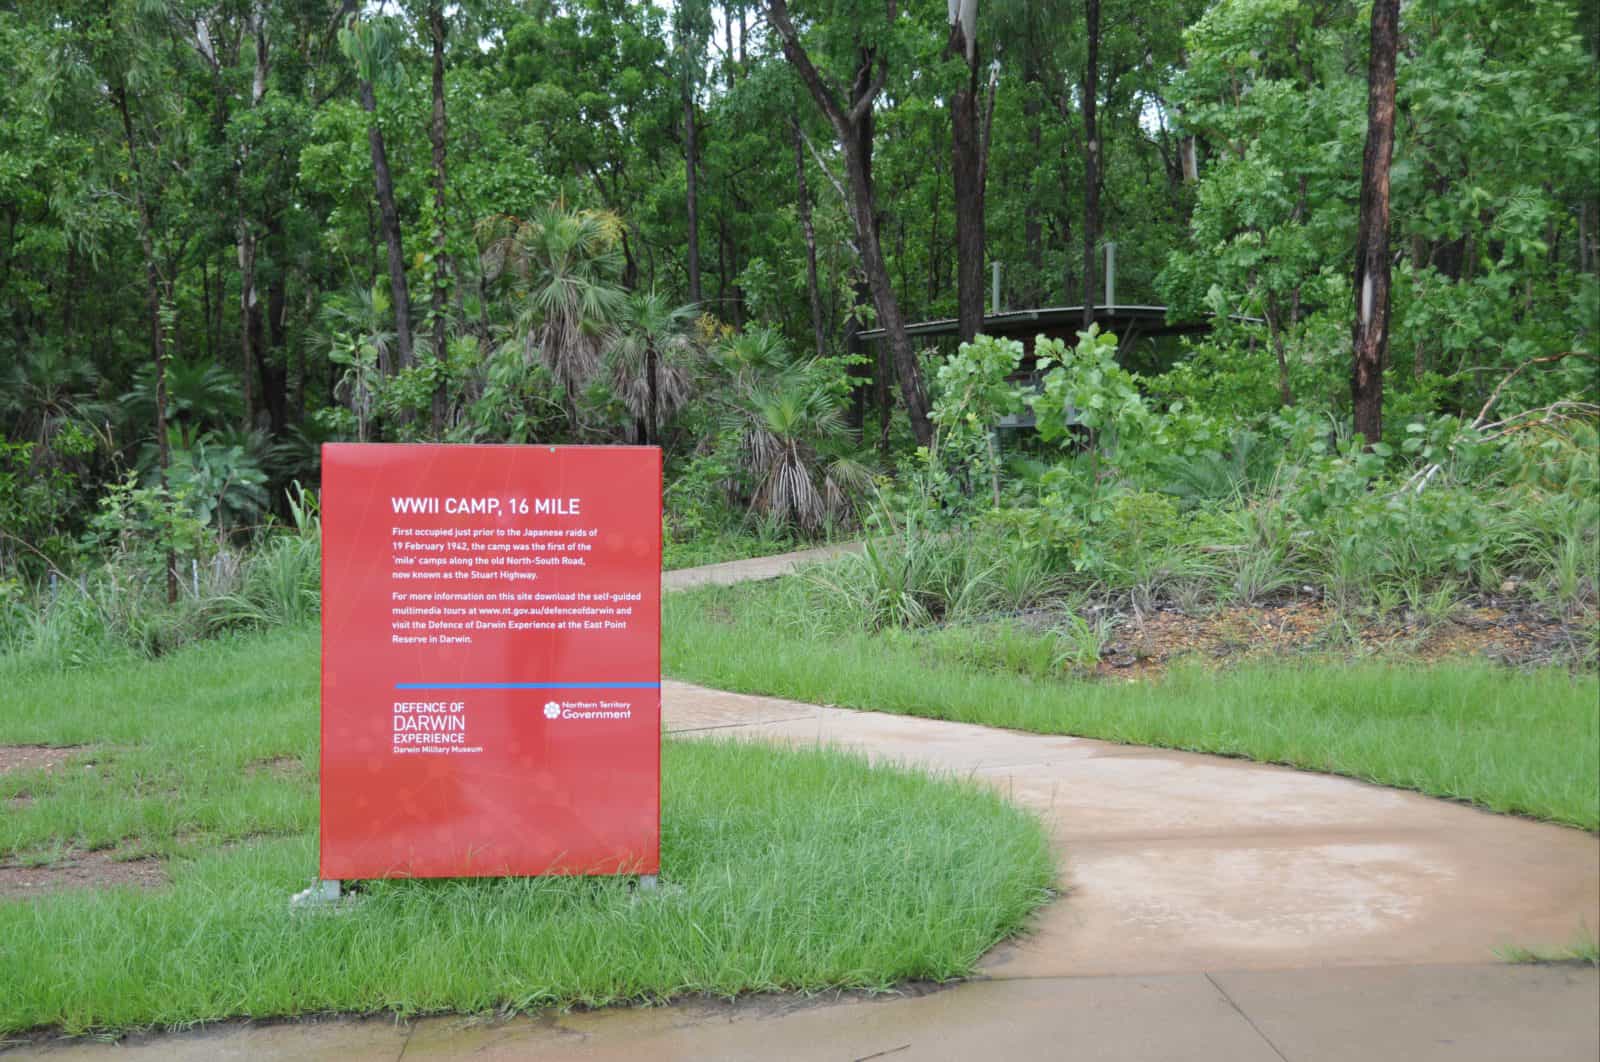 Identification signage for the site at Mackillop Court.